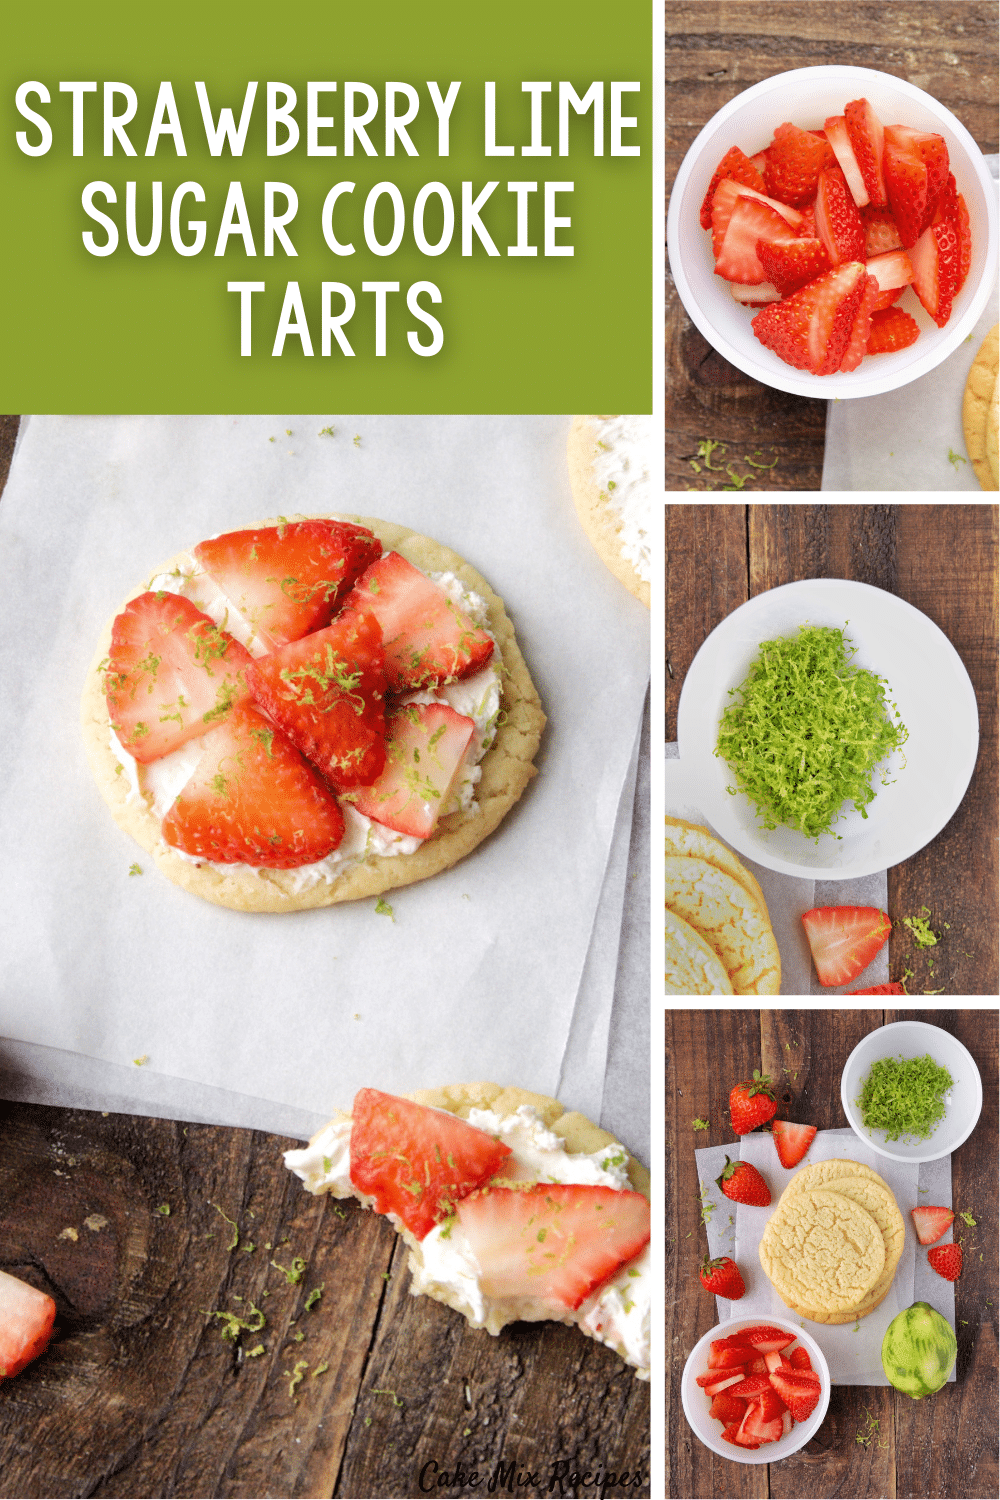 These Strawberry Lime Sugar Cookie Tarts are one of the best sugar cookie recipes. The sweetness of the strawberry with the lime is the best! #strawberry #lime #cookietarts #sugarcookie #recipe via @wondermomwannab